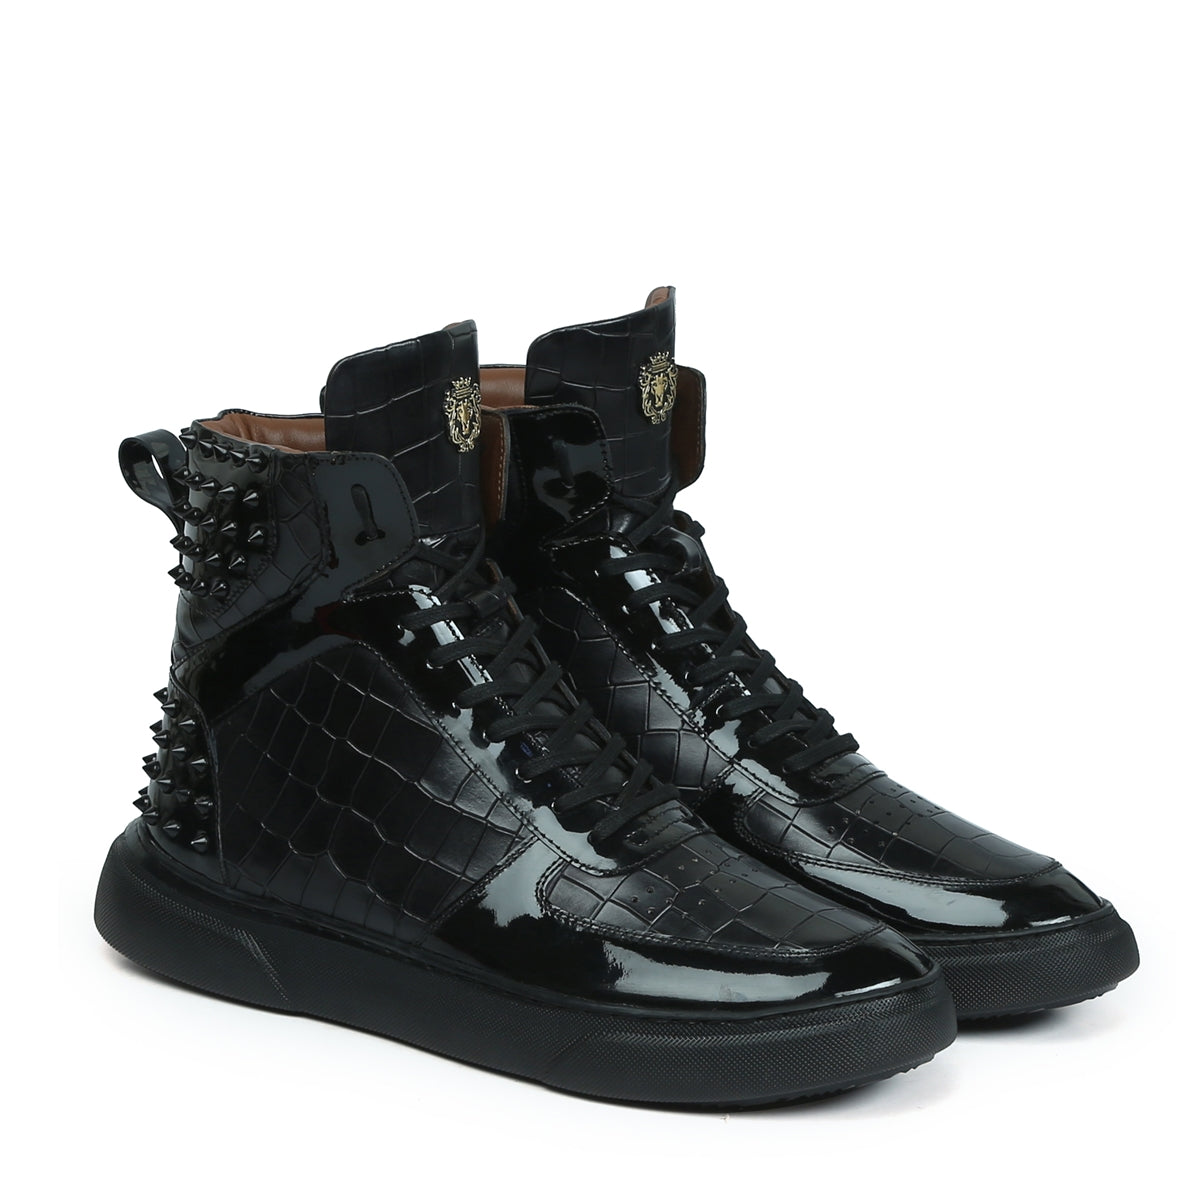 Studded Black Deep Cut Leather Sneakers with Patent Leather Detailing